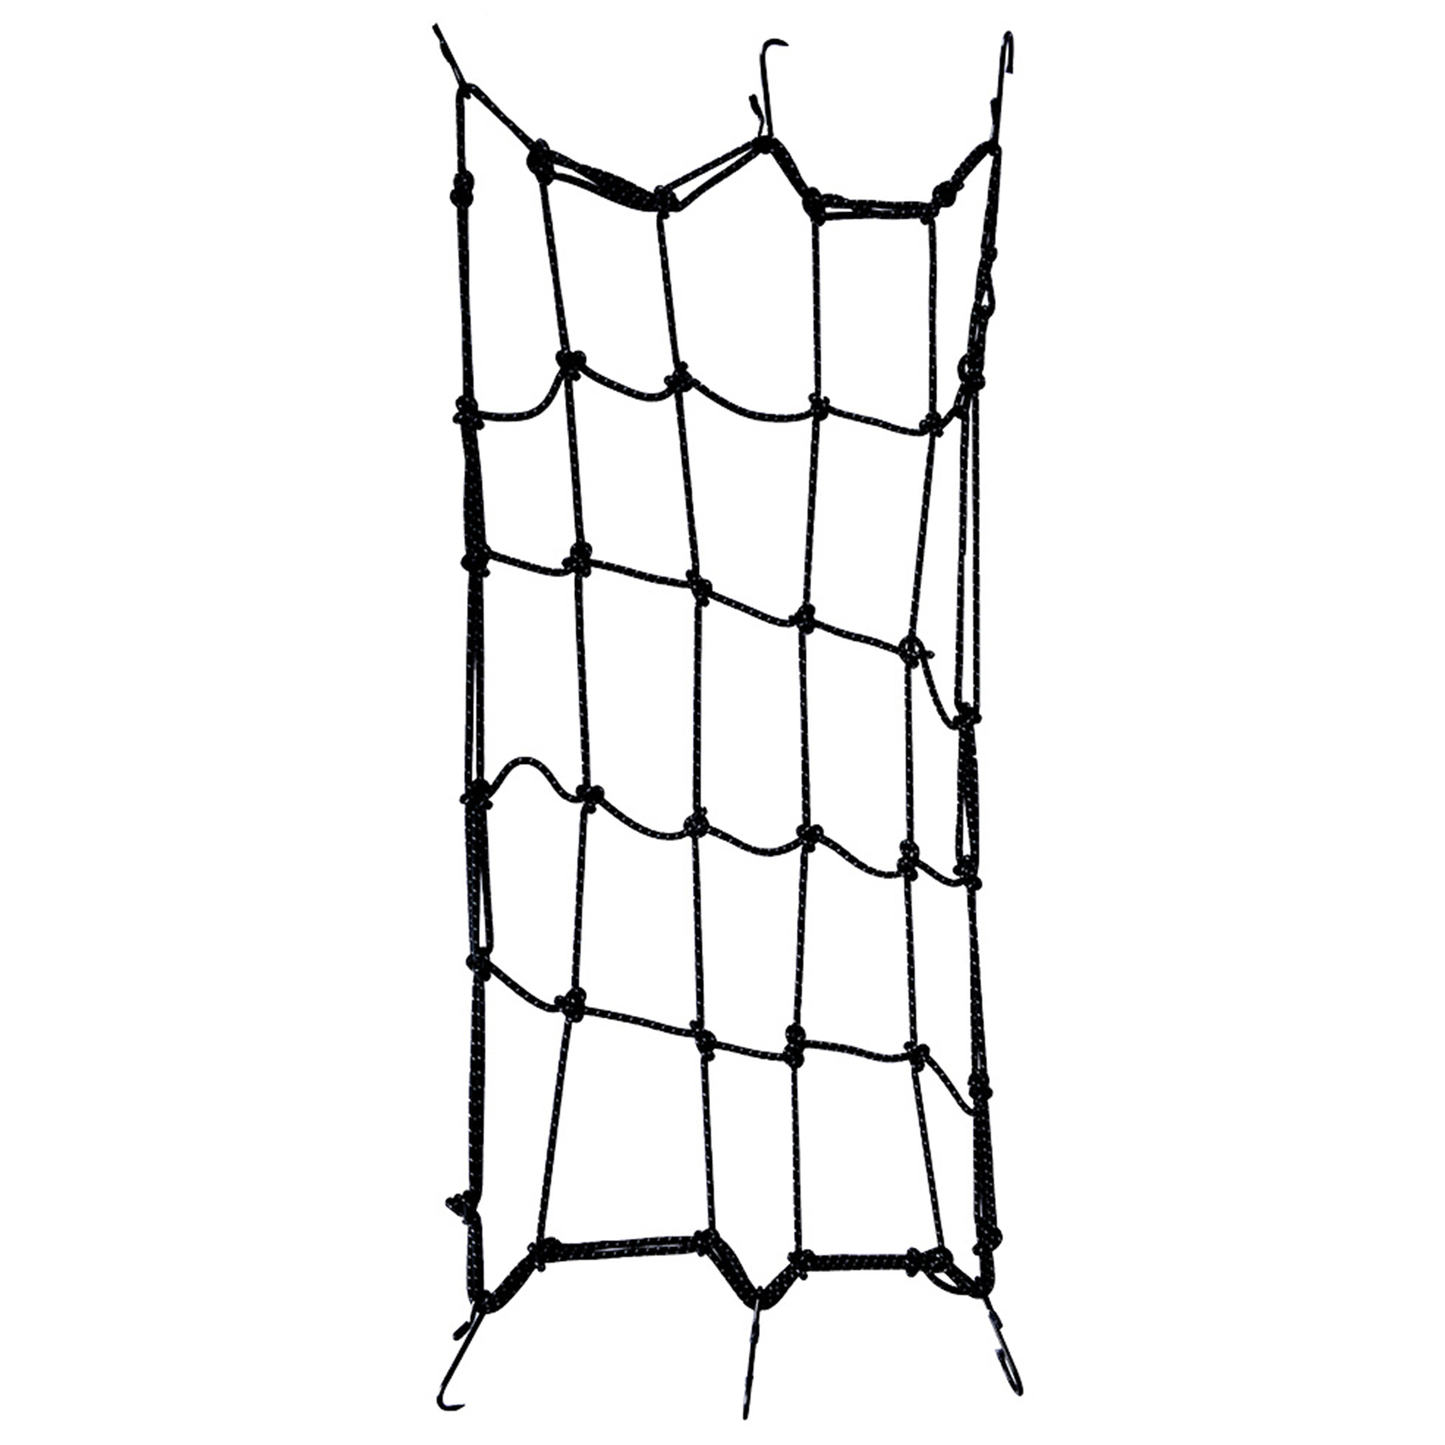 Oxford Cargo Net - Black - Approx 30cm x 30cm (Relaxed)